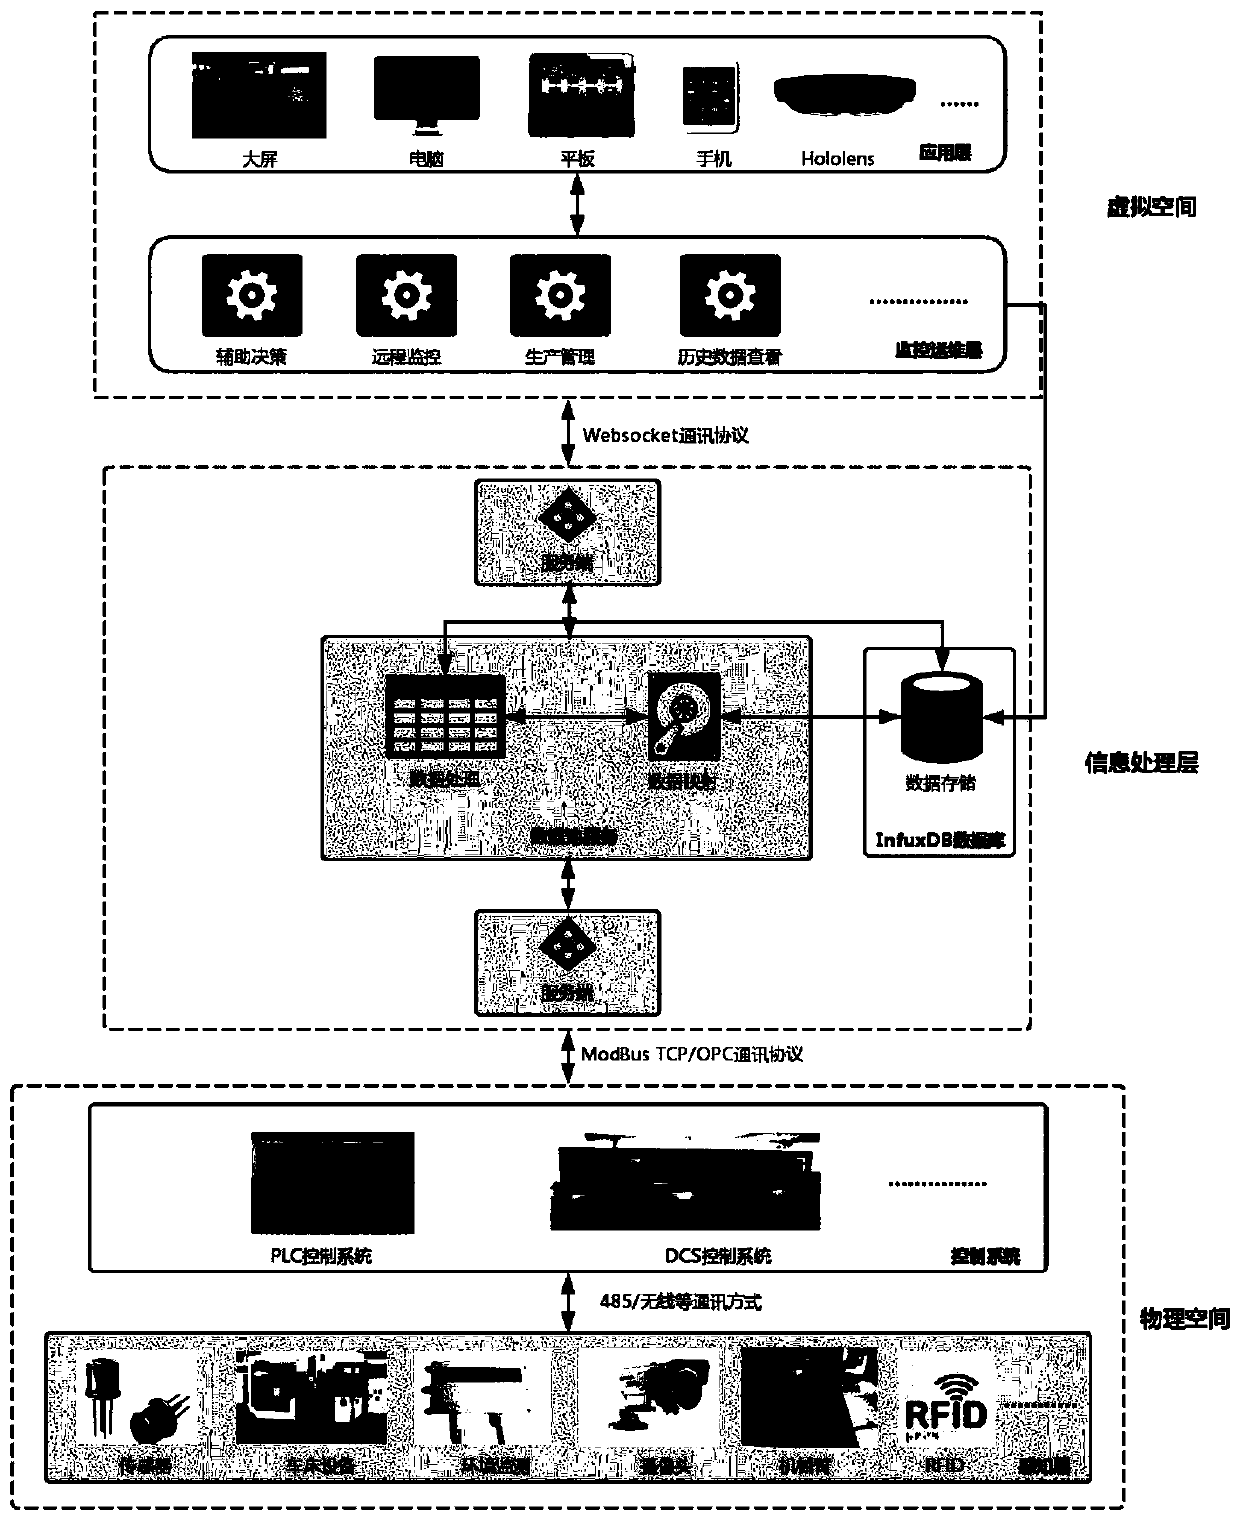 Real-time three-dimensional presentation system based on distributed sensing network